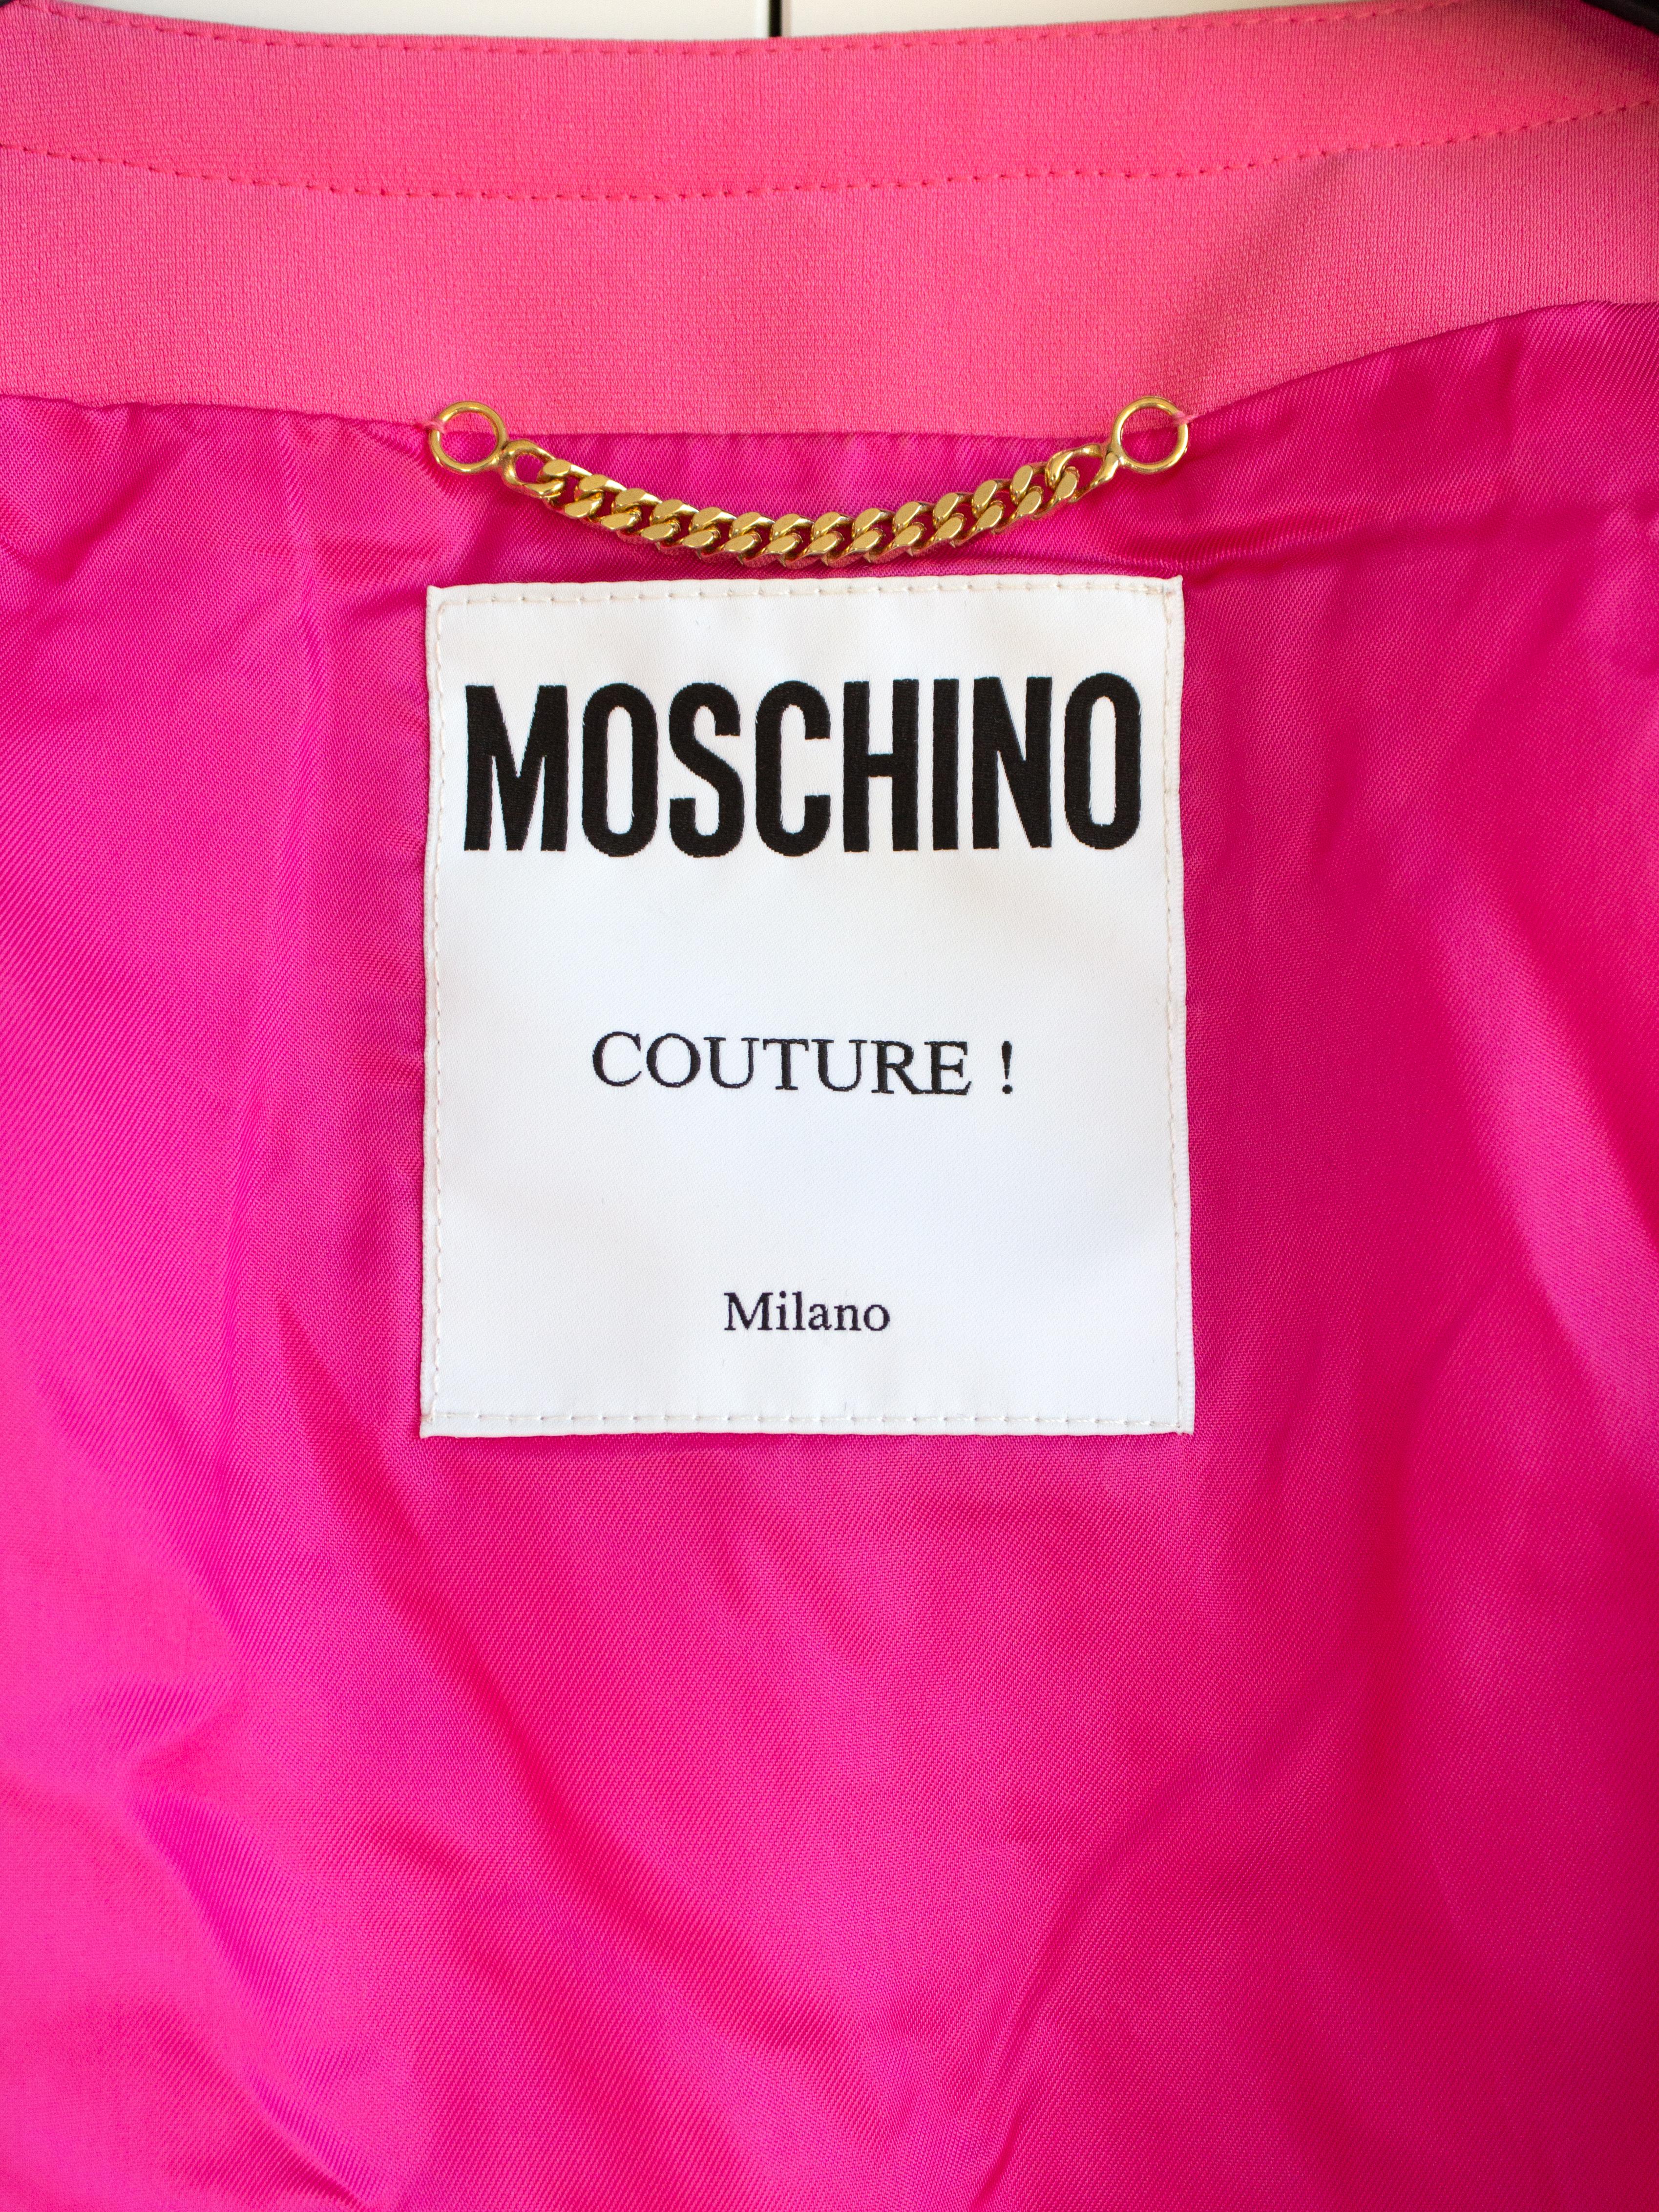 Moschino Couture S/S 2015 Barbie Crystal Embellished Rhinestone Pink Jacket For Sale 5